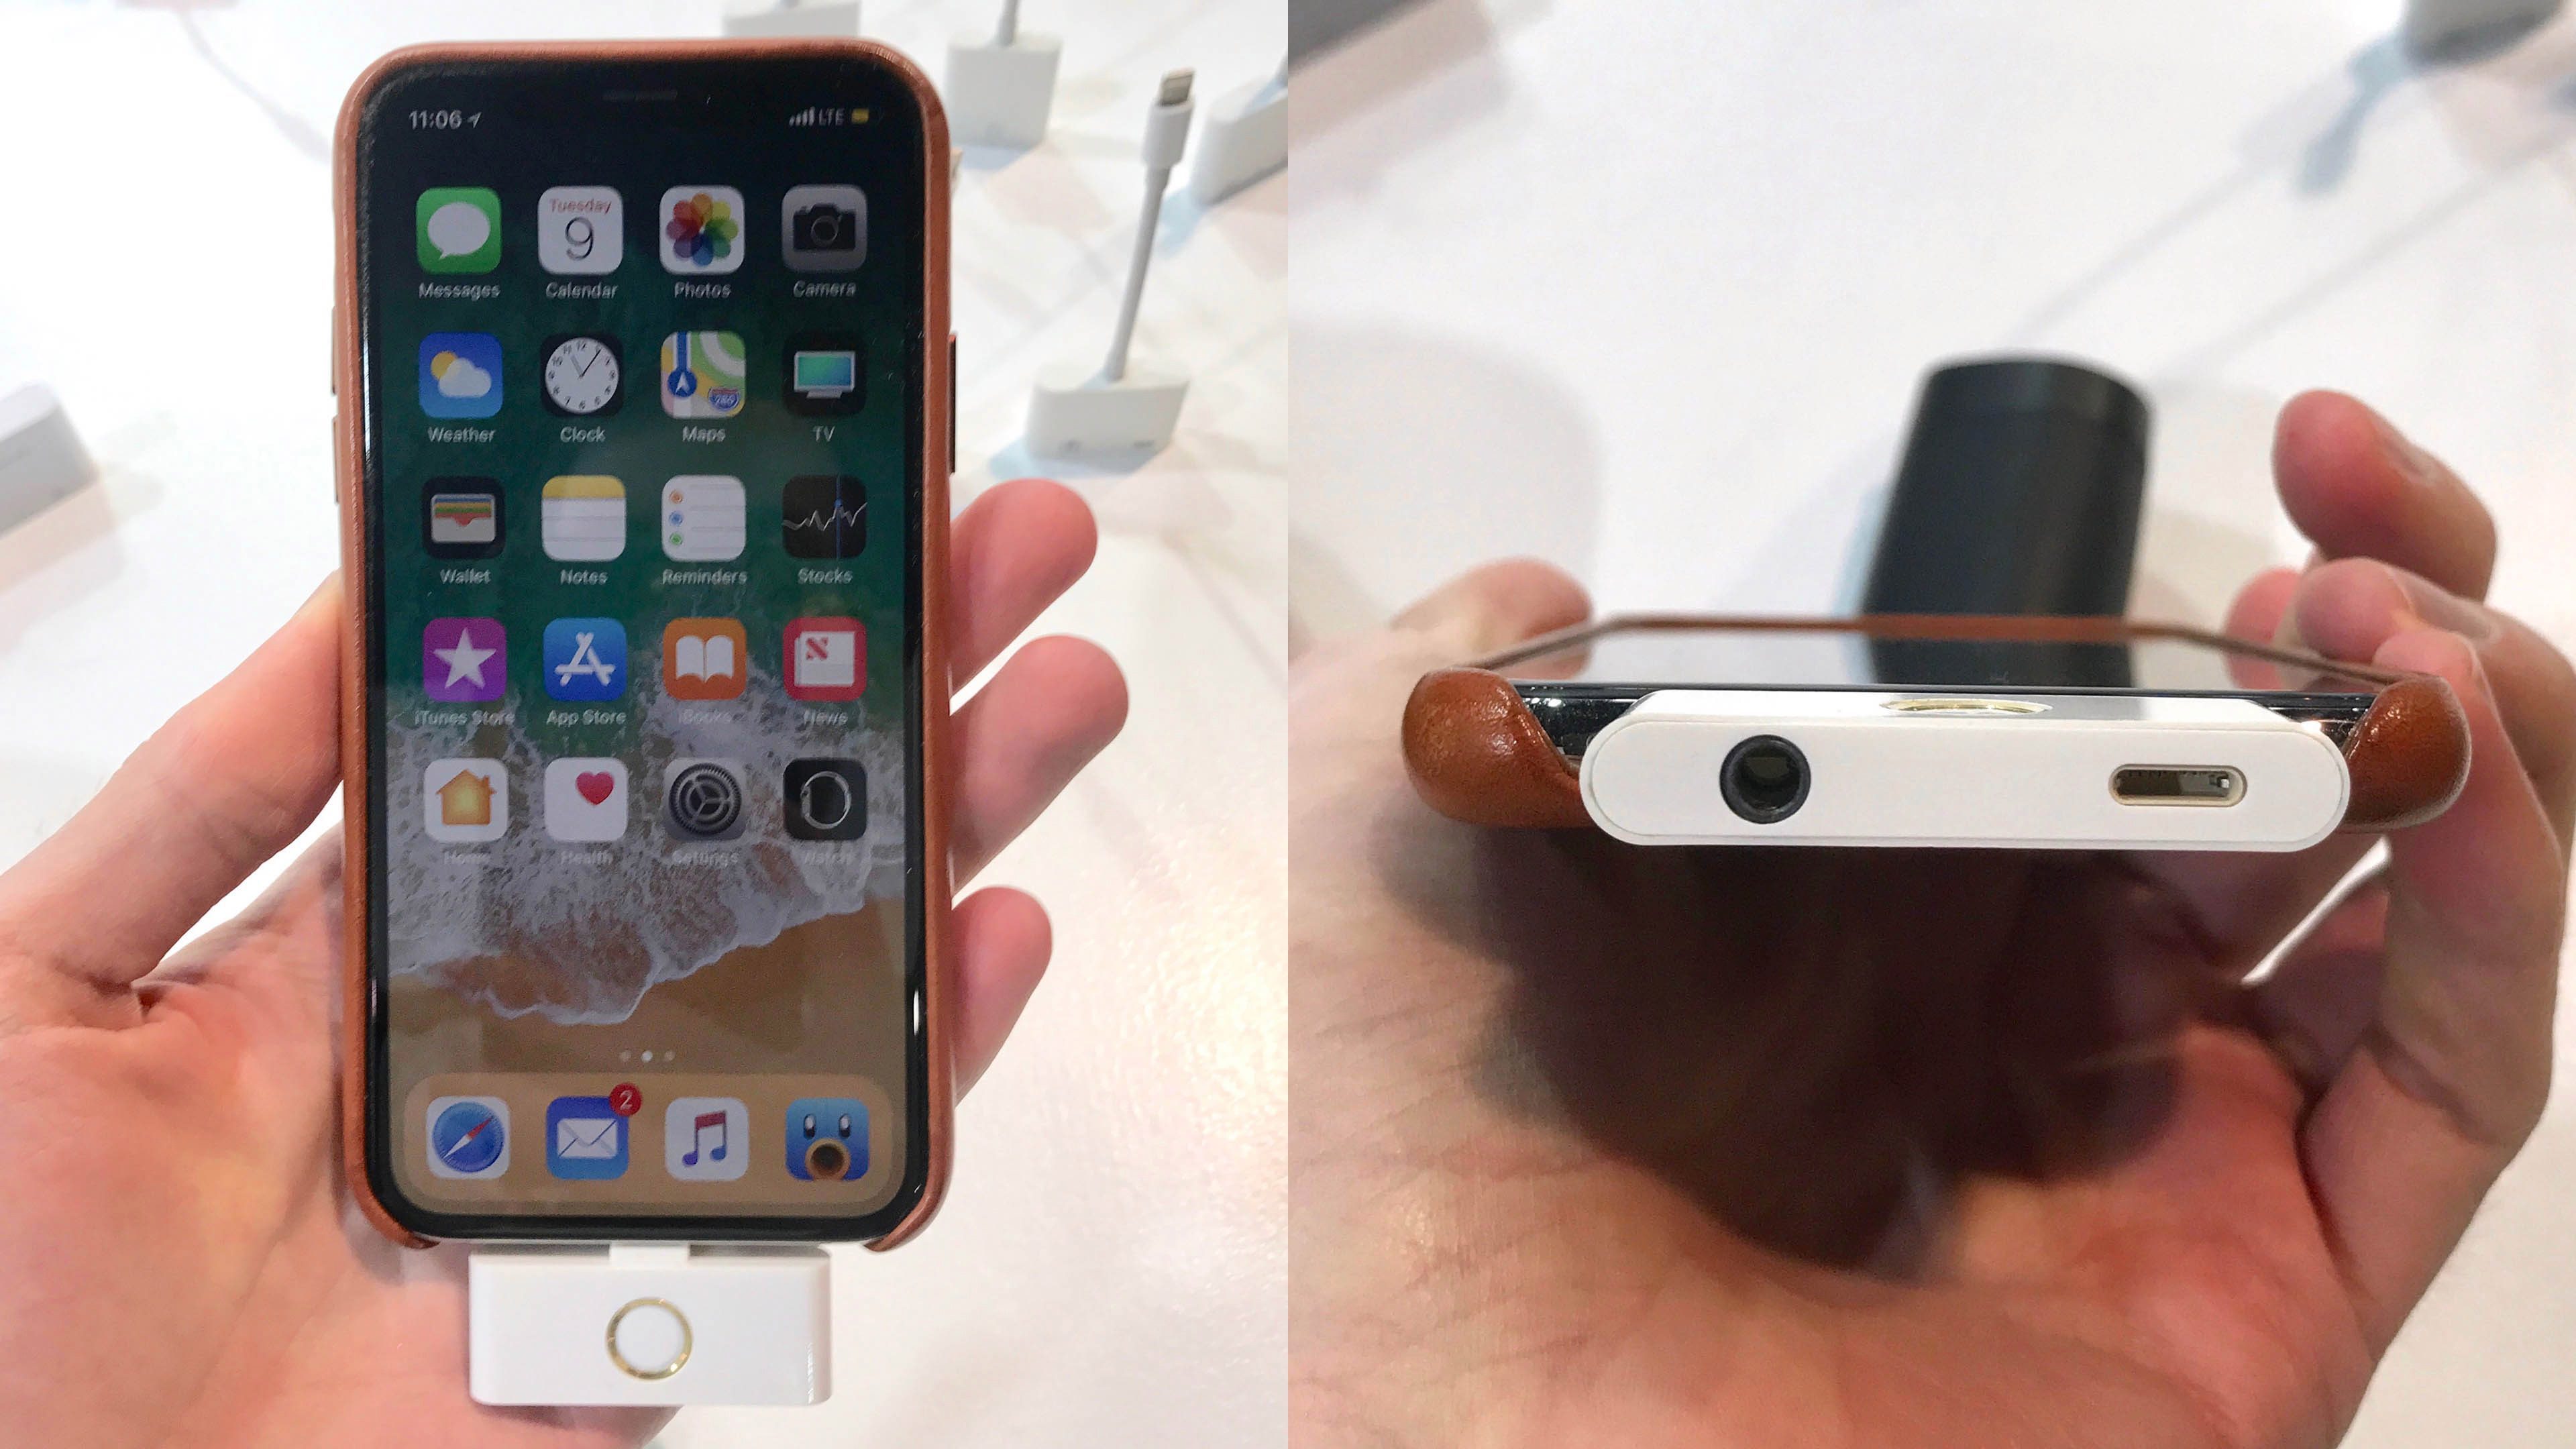 The iPhone X home button "dongle" is bizarre: A journey through the strange world of aftermarket Apple accessories